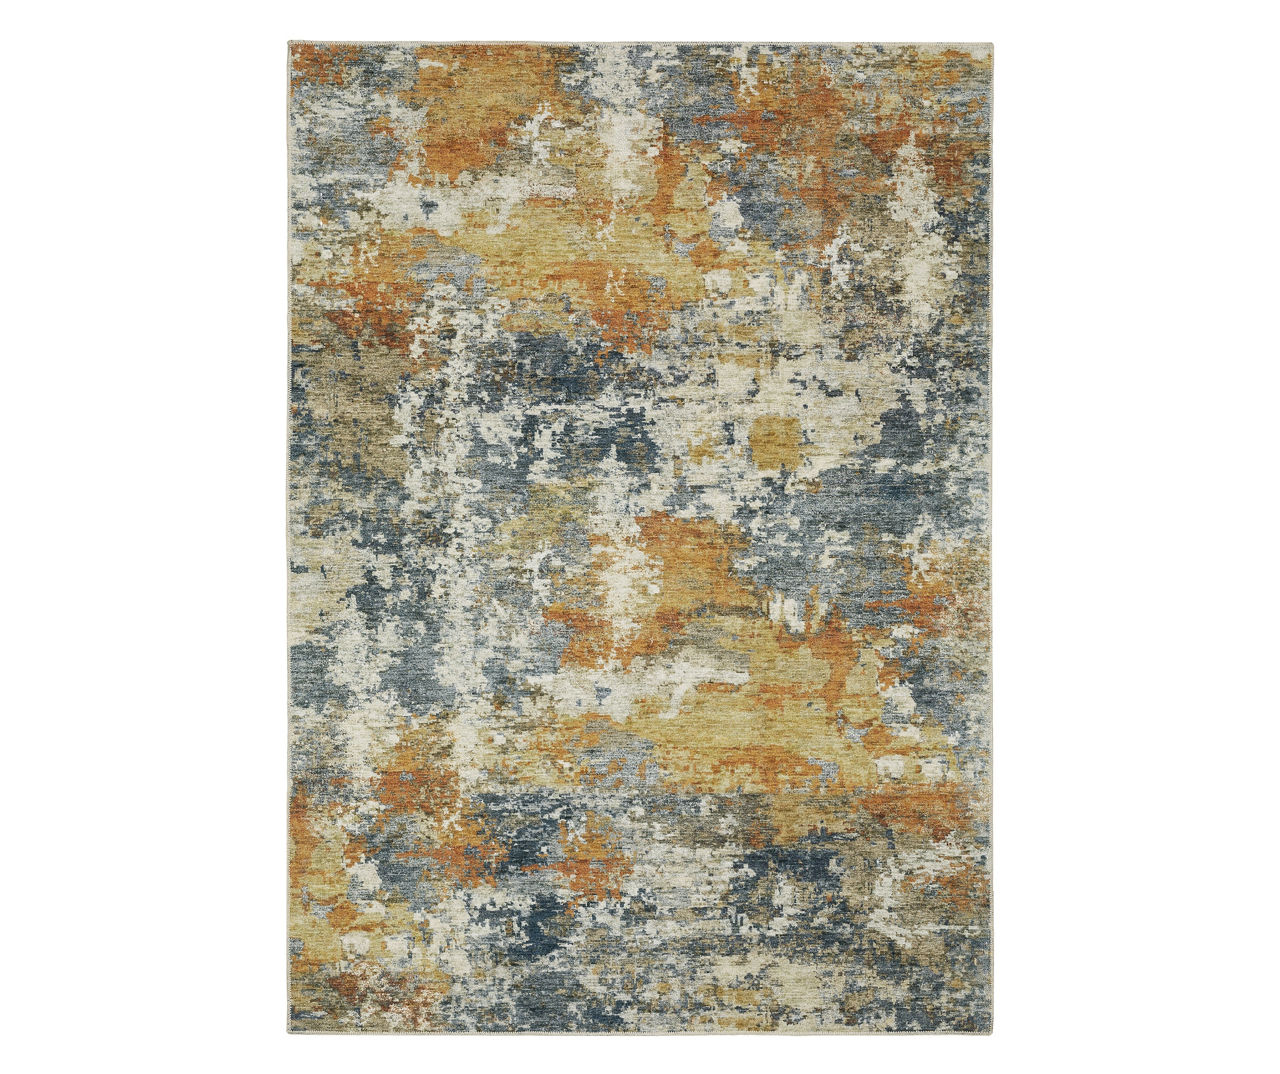 Malay Blue & Gold Abstract Area Rug, (5' x 7')